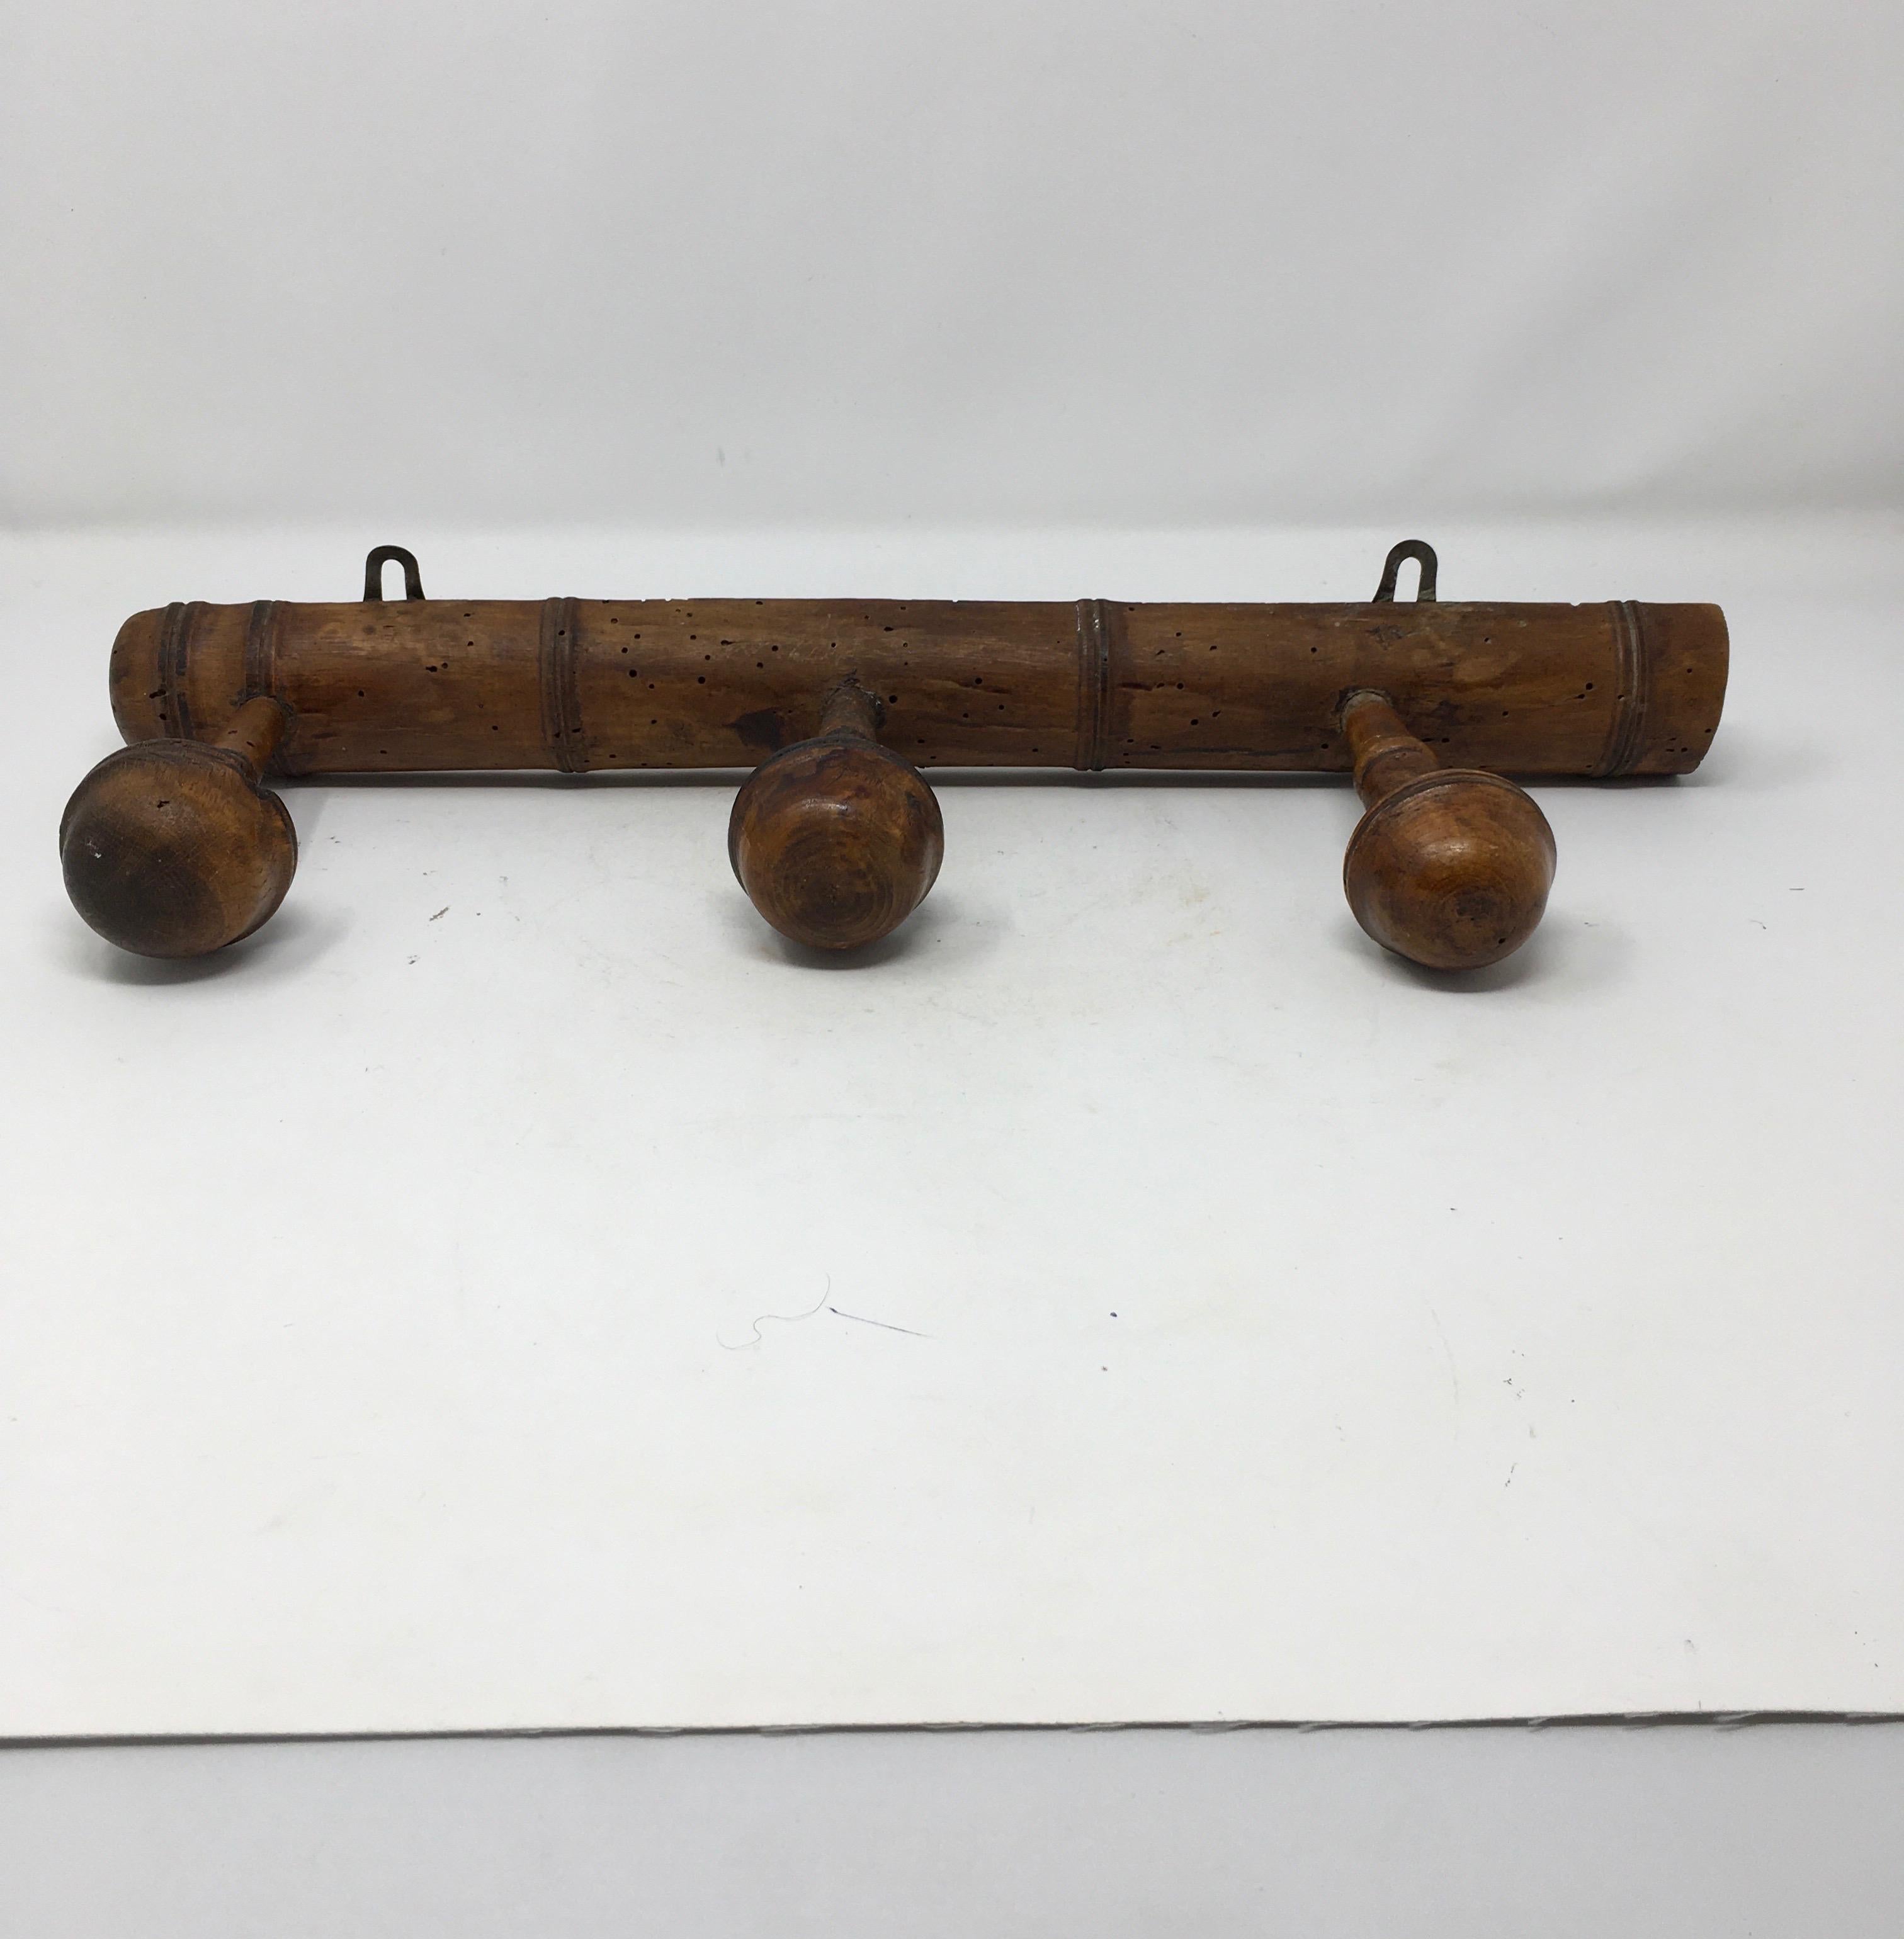 Found in the South of France, this rustic antique French faux bamboo coat/hat rack is manufactured with three pegs and two iron hooks on the base. Rustic farmhouse charm, yet sturdy and versatile for modern day.

This piece weighs 1 lb.